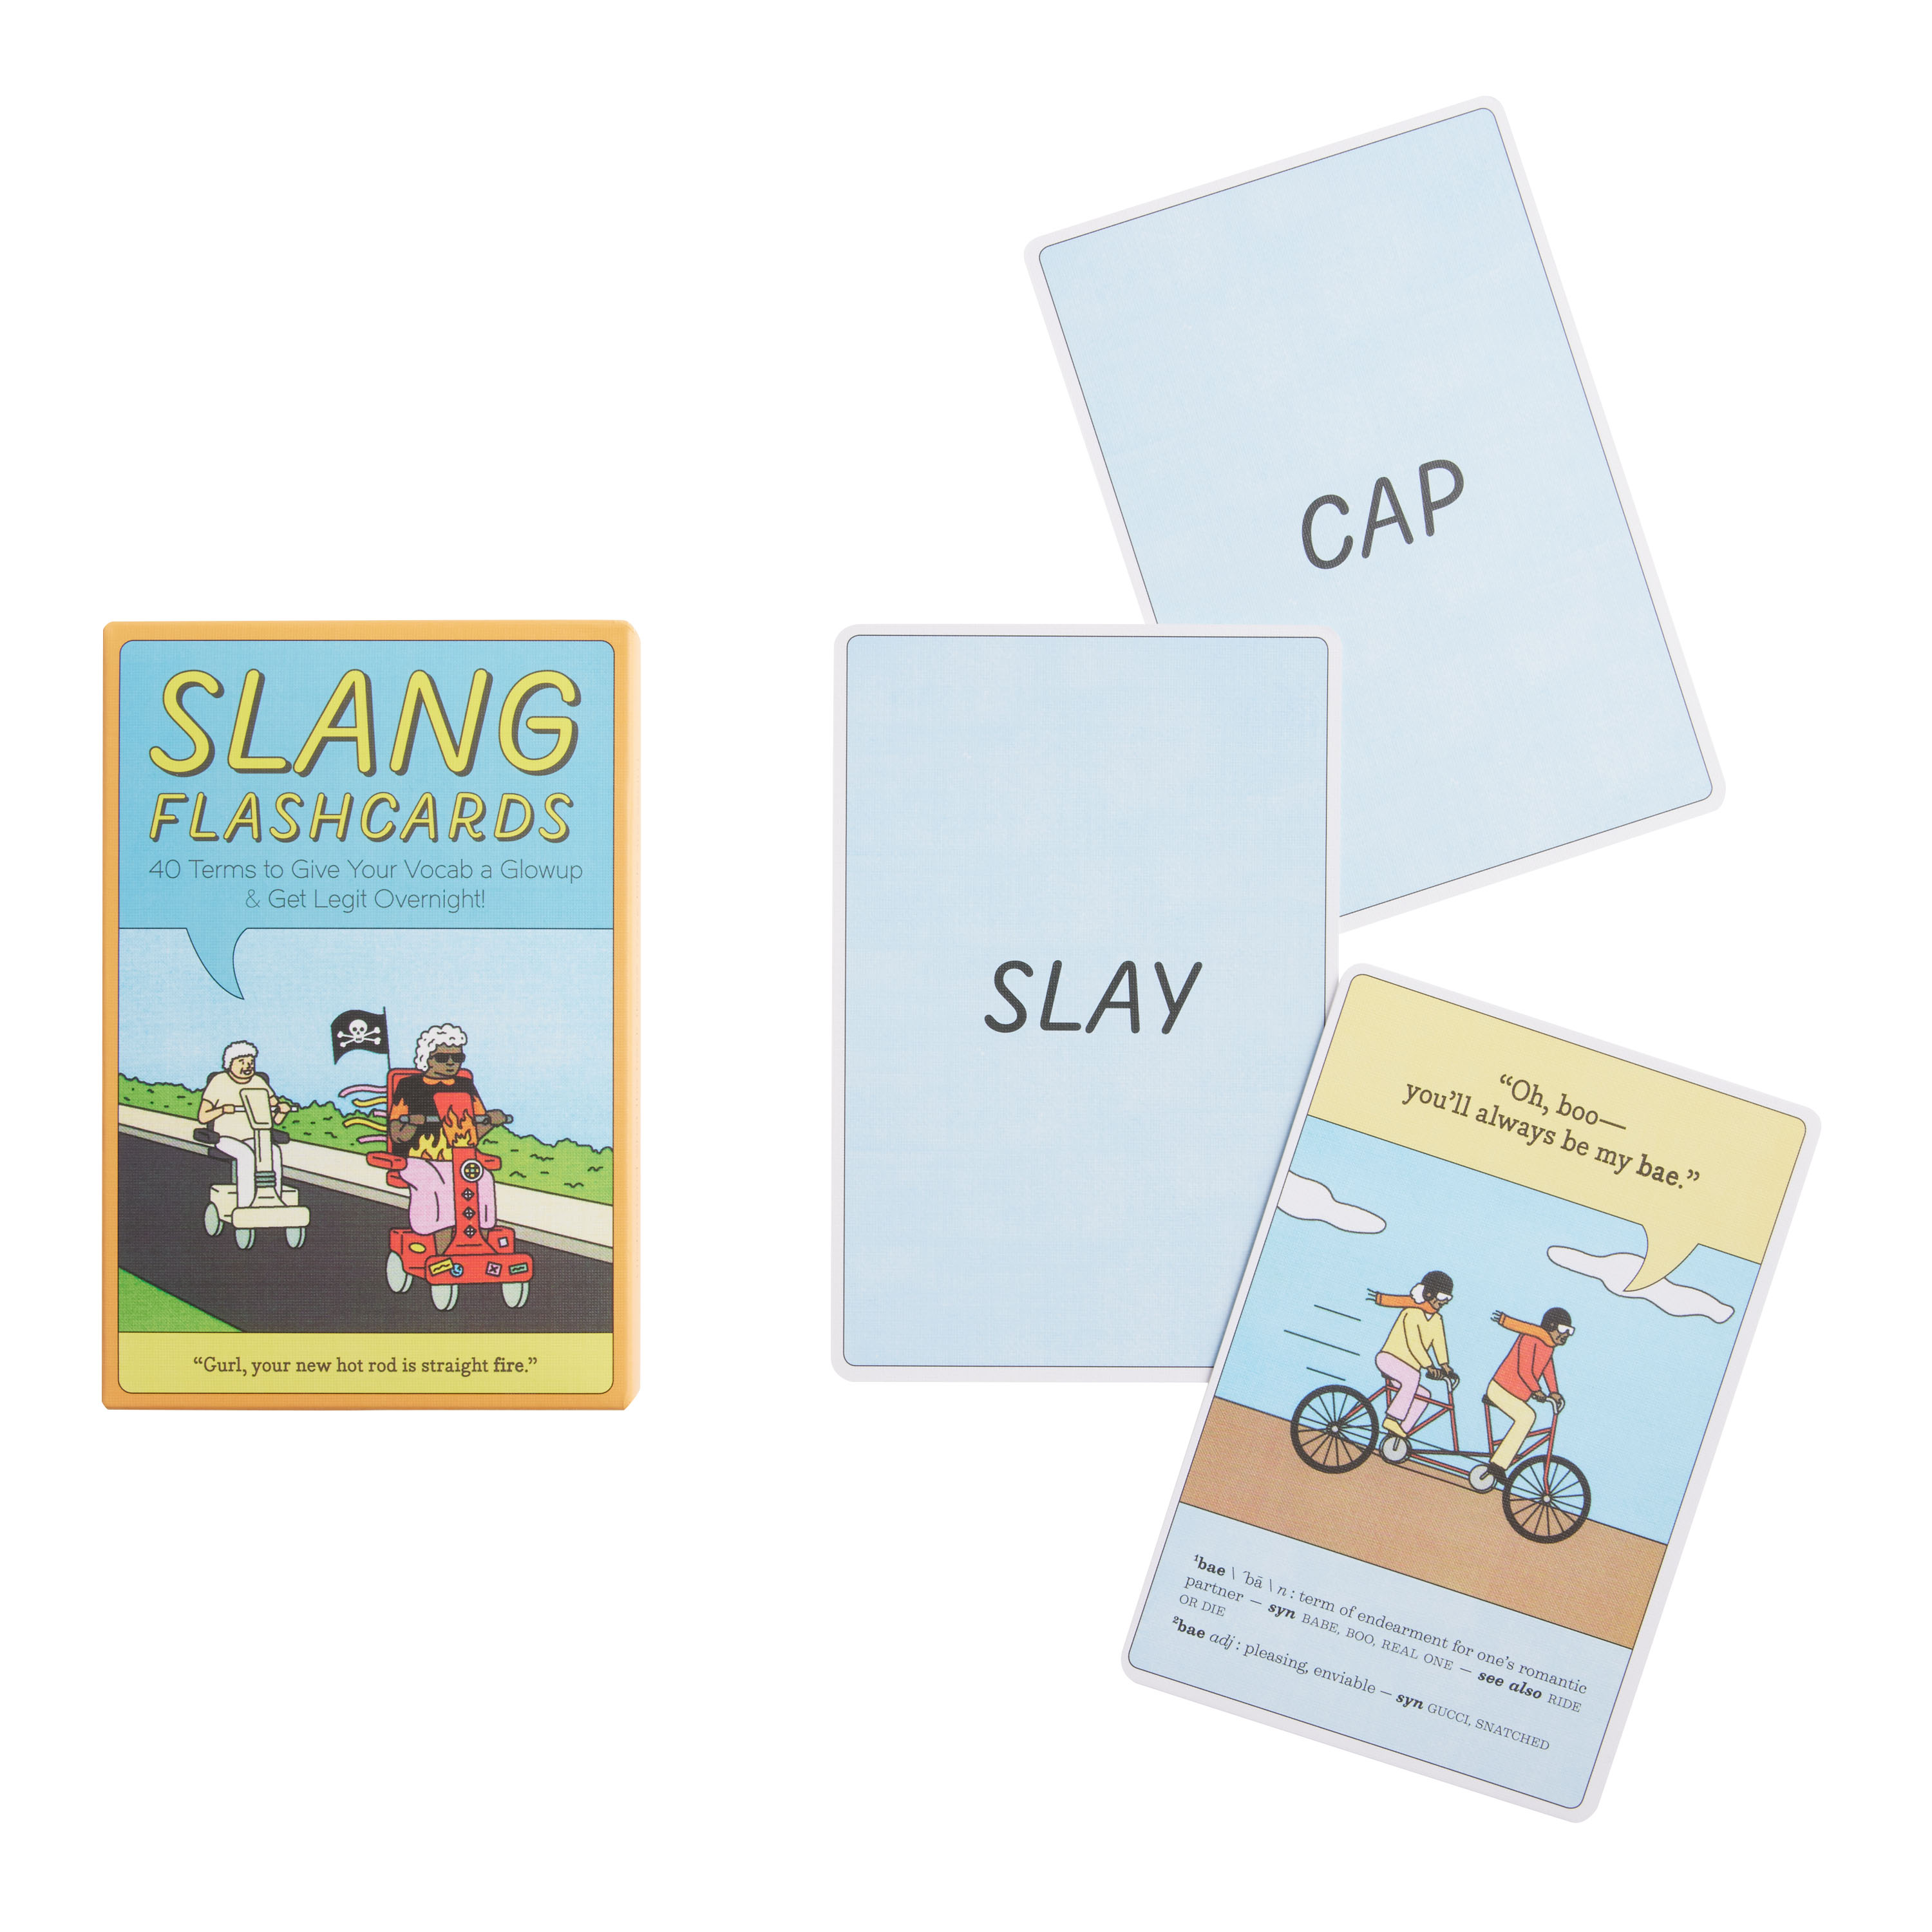 Slang Cards on X: Hello! Our slang term of the day is “Goner